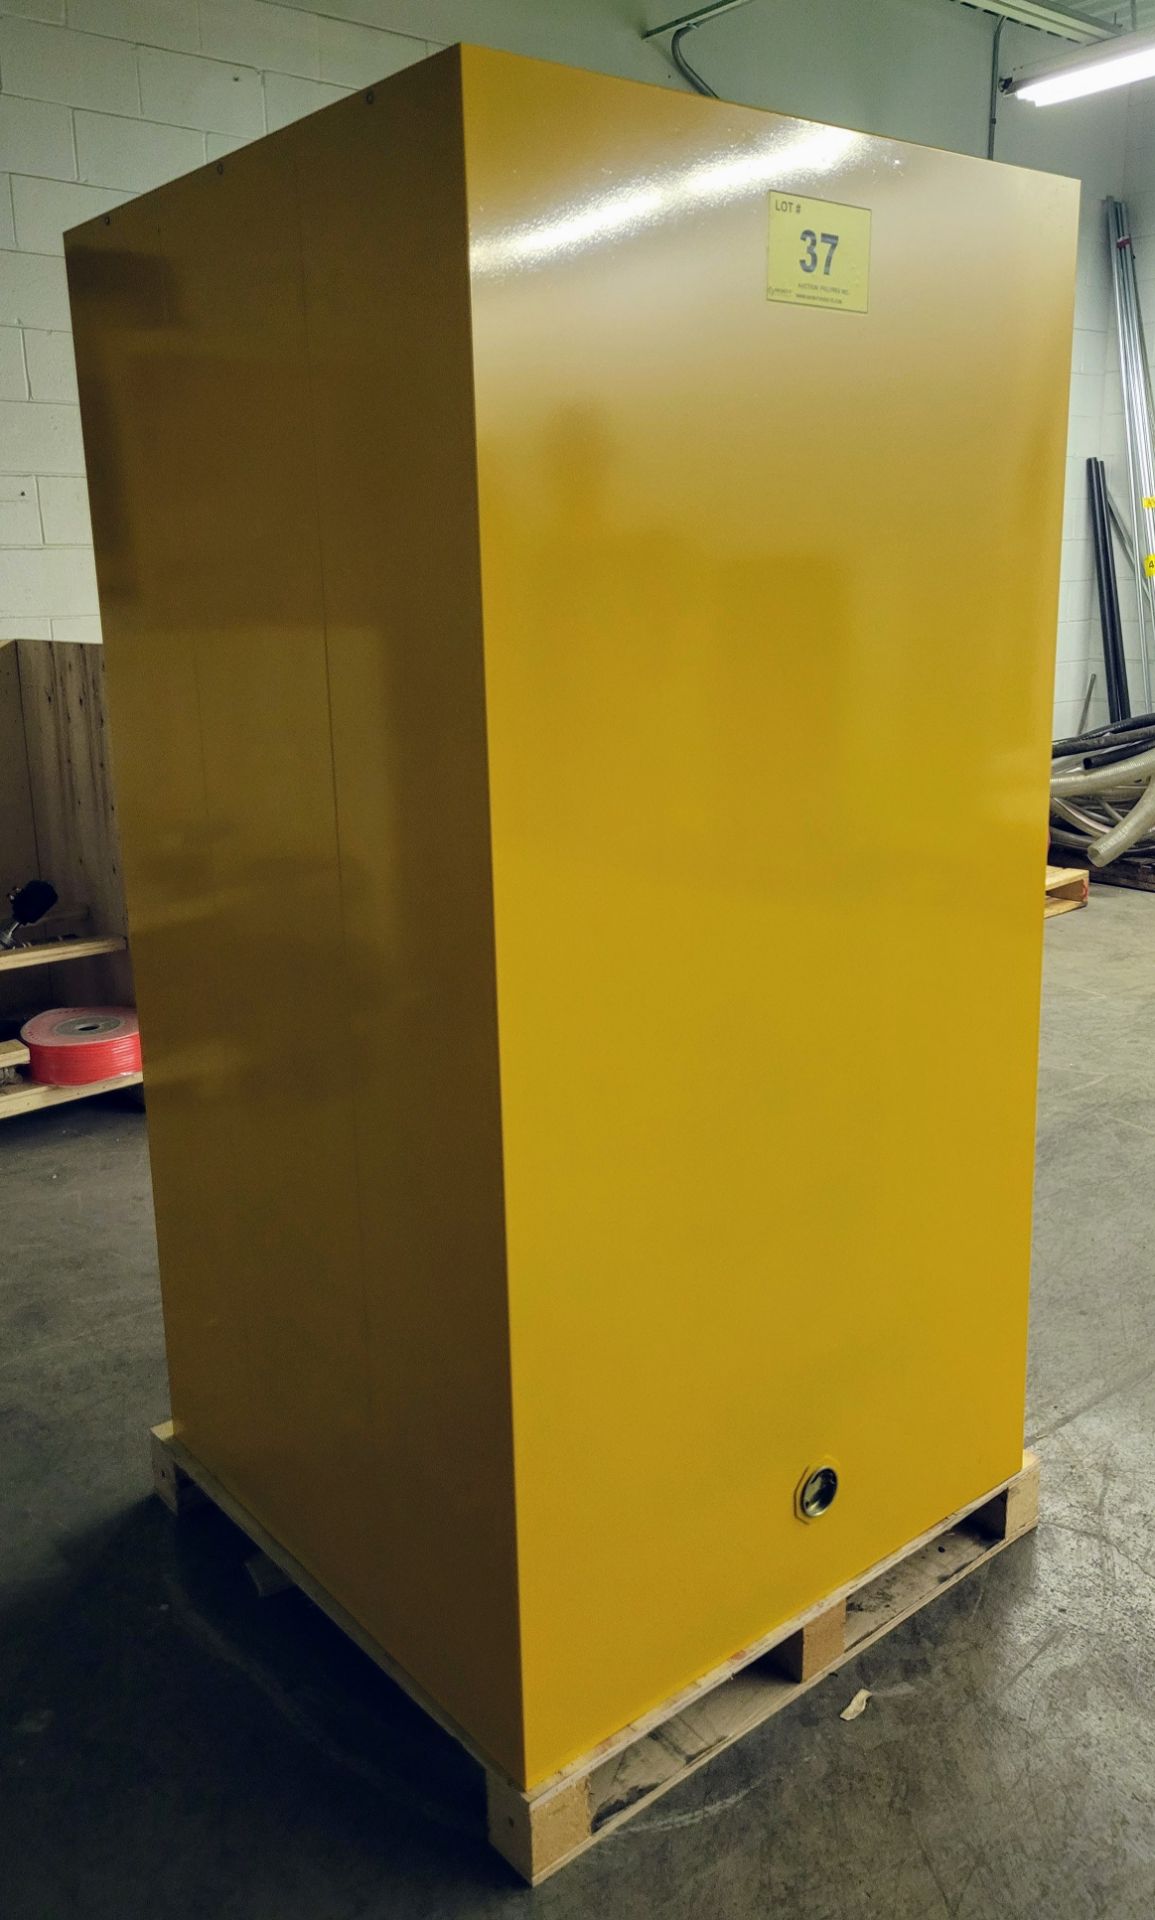 NEW FLAMMABLE TWO DOOR STORAGE CABINET - (34"L X 34"W X 65"H) - Image 2 of 3